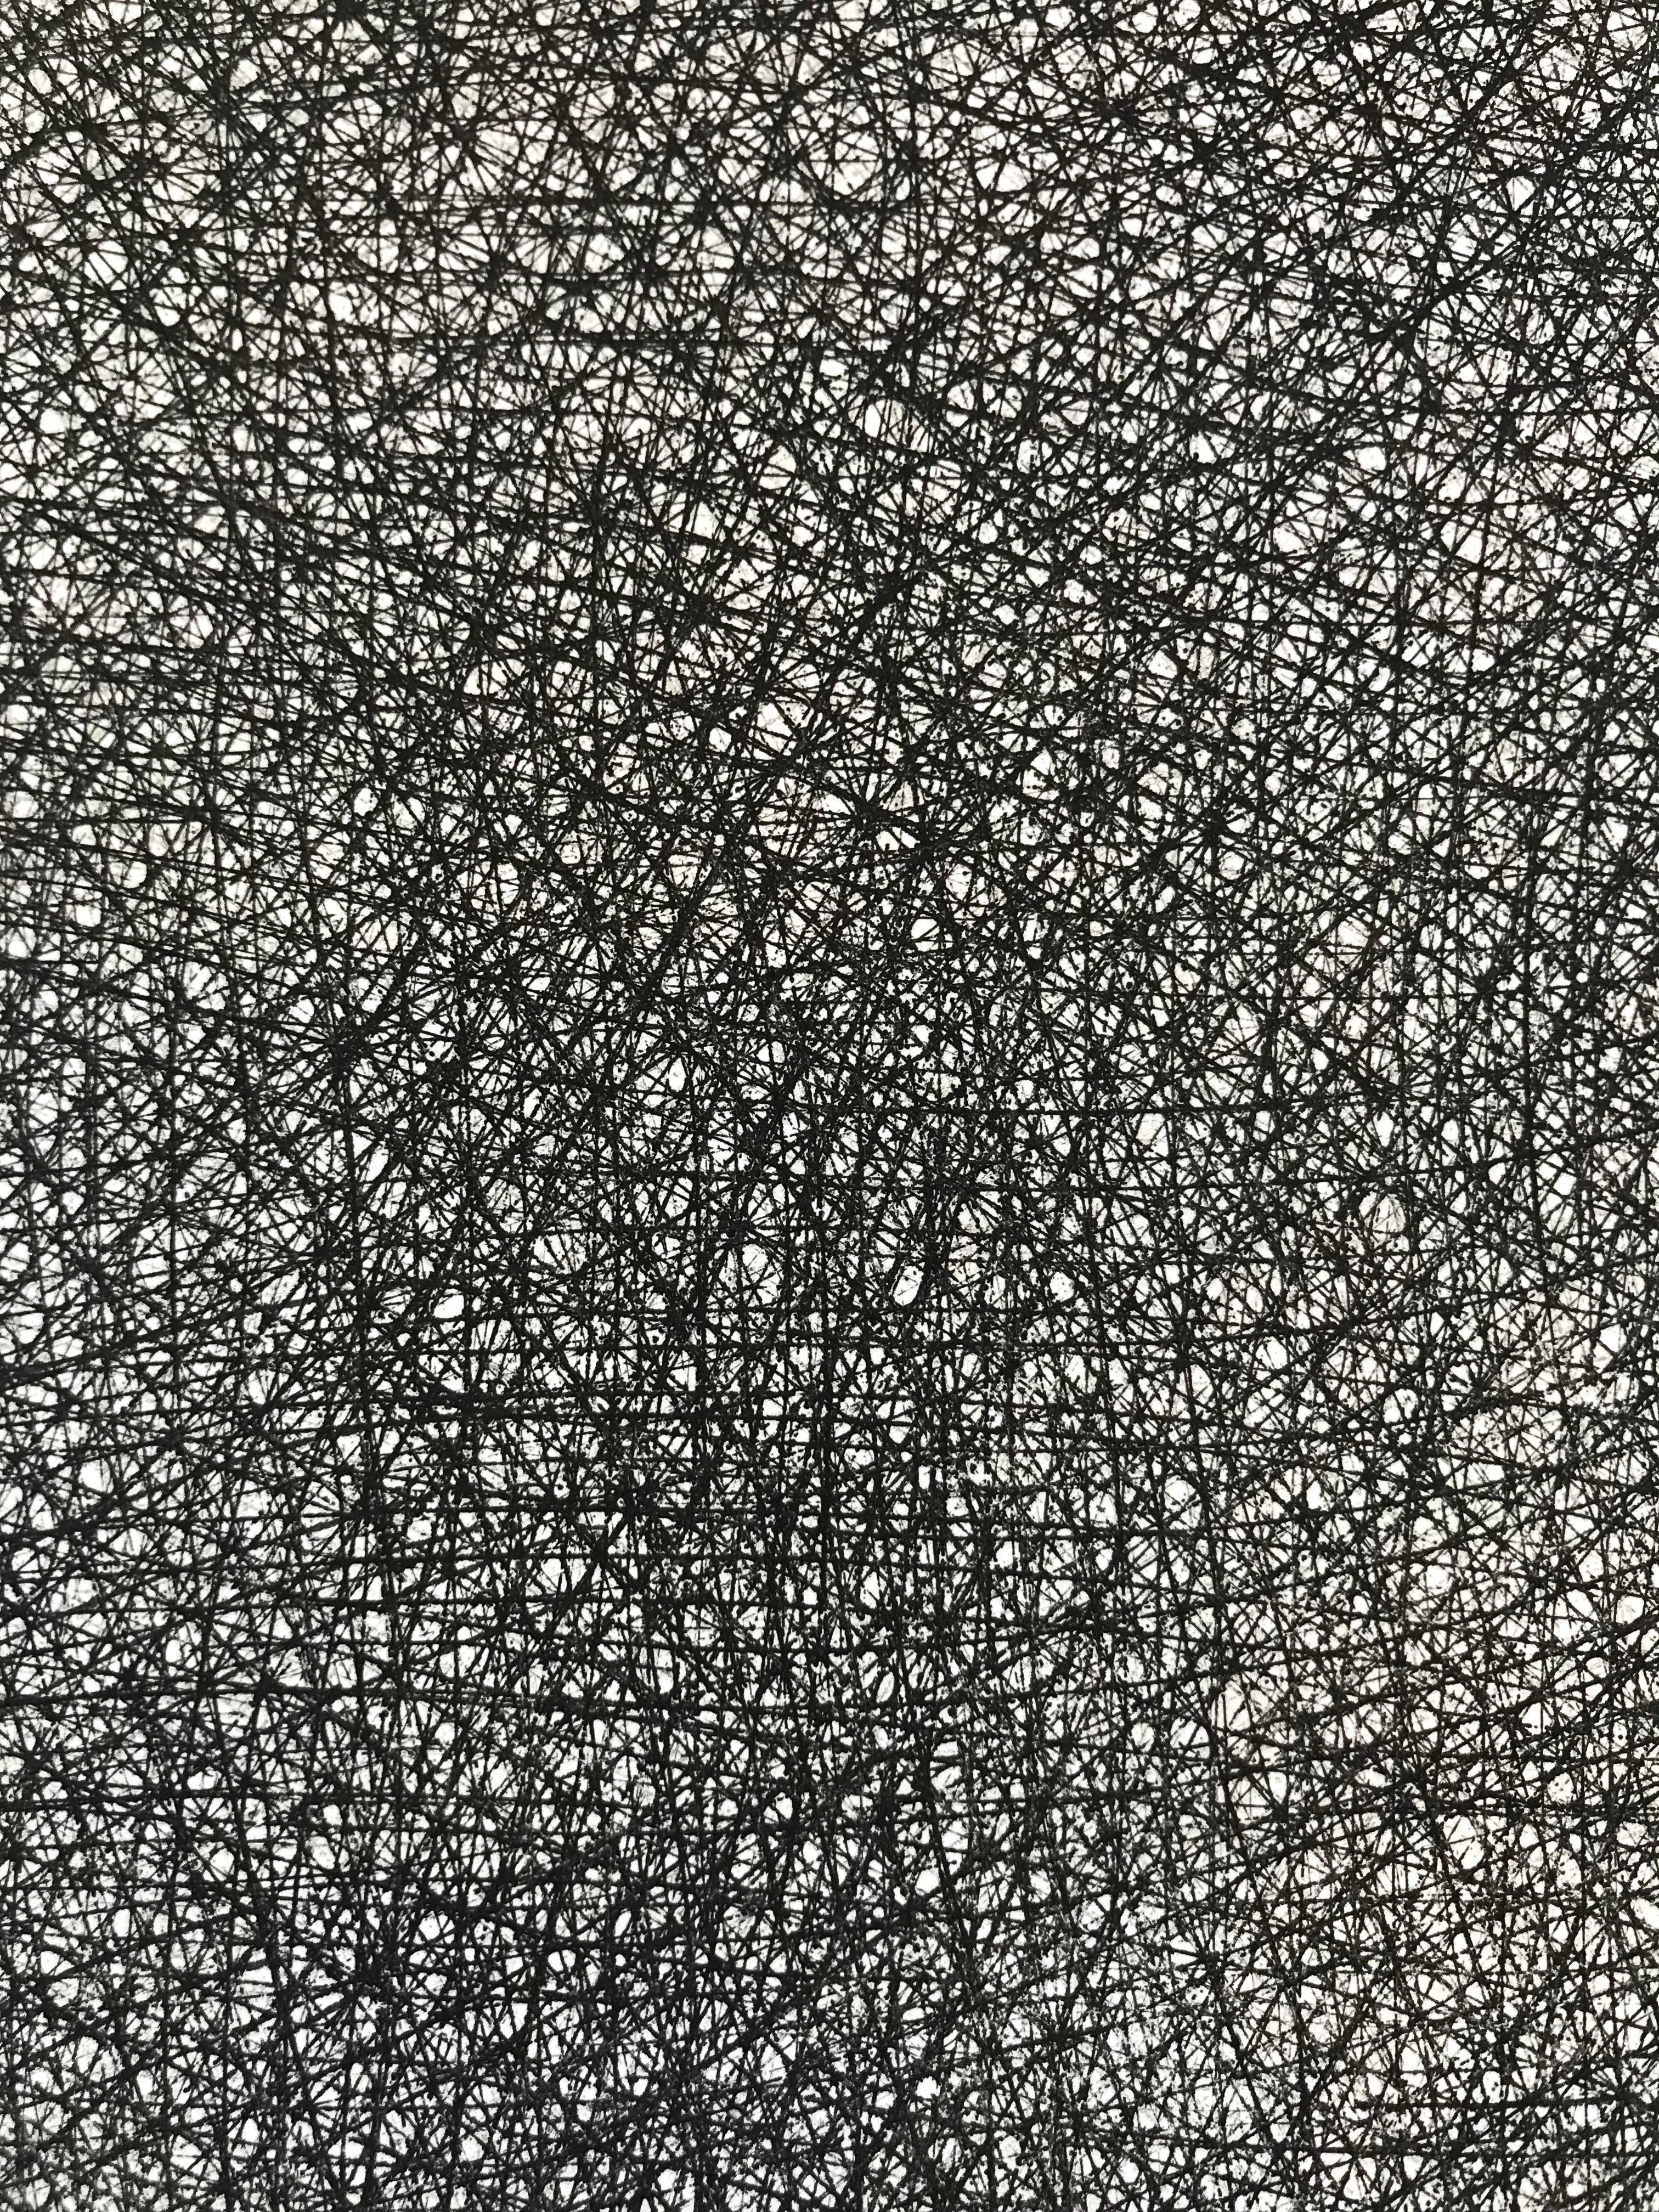 Matilde Alessandra’s etching “Trans #2” is part of her ongoing study of subtly dramatic black and white series of non-objective monochromatic ink on paper works.  Known for her minimalist light sculptures, Alessandra has elegantly translated the